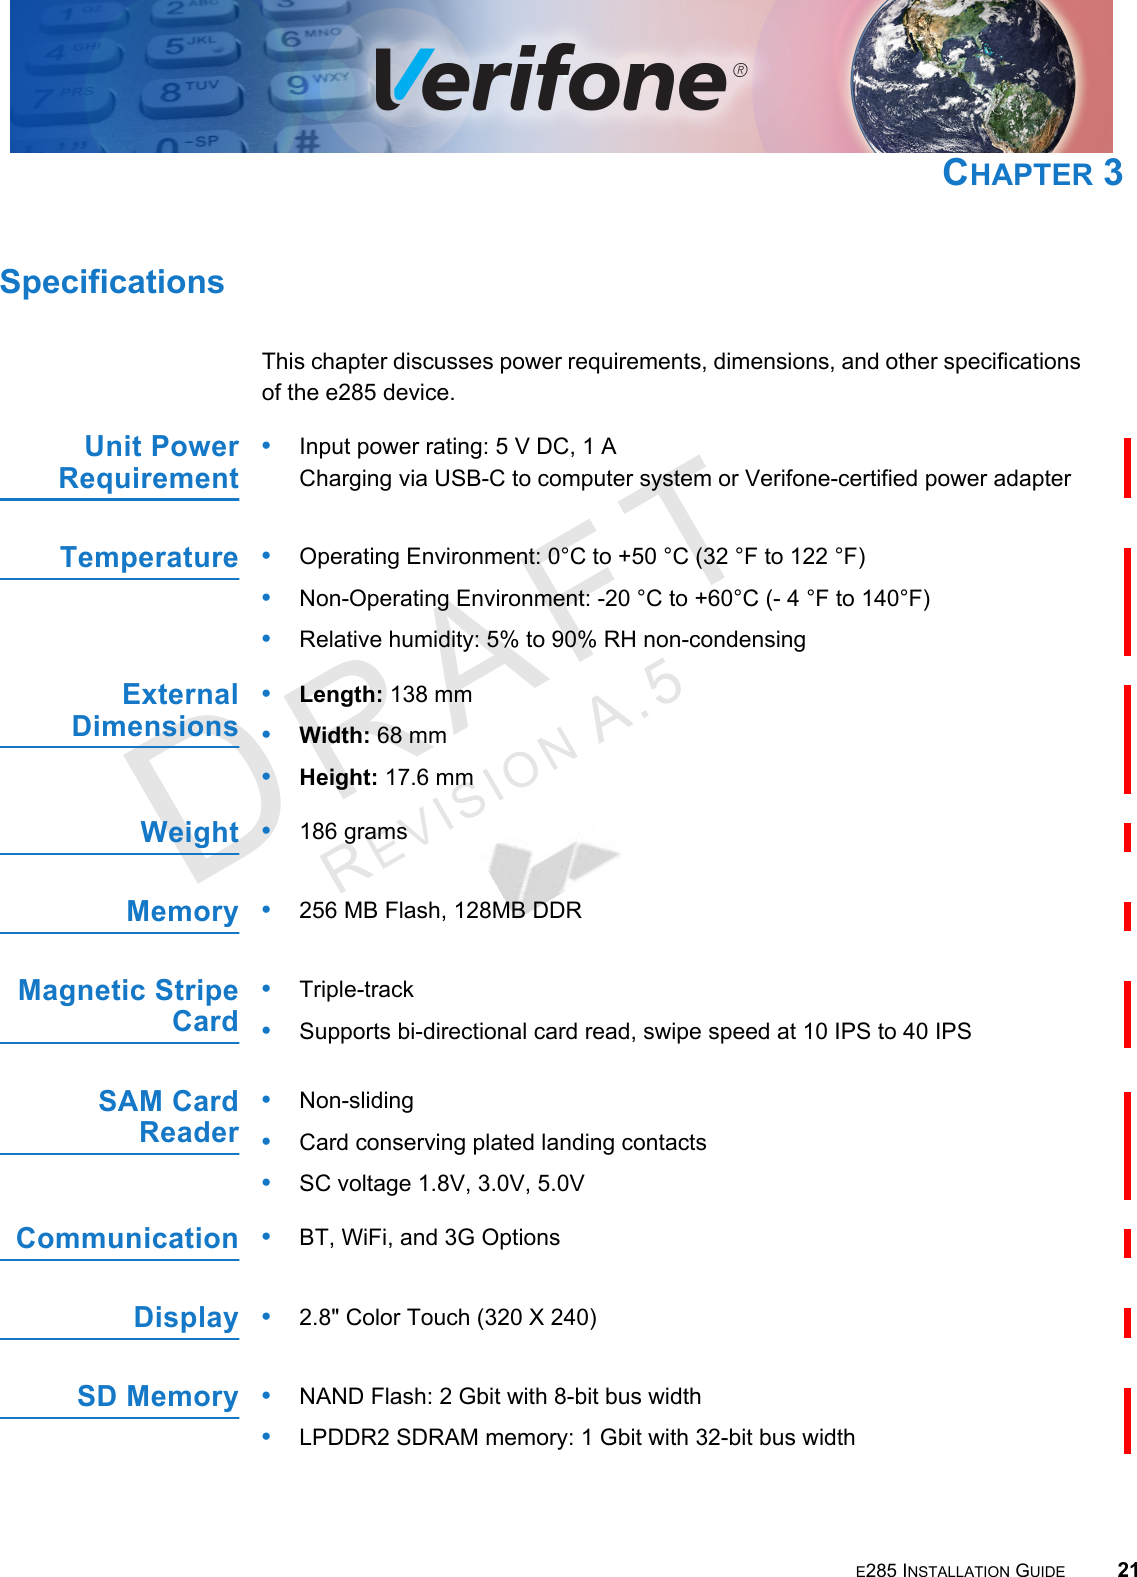 E285 INSTALLATION GUIDE 21DRAFTREVISION A.5 CHAPTER 3SpecificationsThis chapter discusses power requirements, dimensions, and other specifications of the e285 device.Unit PowerRequirement•Input power rating: 5 V  DC, 1  A Charging via USB-C to computer system or Verifone-certified power adapterTemperature•Operating Environment: 0°C to +50 °C (32 °F to 122 °F)•Non-Operating Environment: -20 °C to +60°C (- 4 °F to 140°F)•Relative humidity: 5% to 90% RH non-condensingExternal Dimensions•Length: 138 mm•Width: 68 mm •Height: 17.6 mmWeight•186 gramsMemory•256 MB Flash, 128MB DDRMagnetic Stripe Card•Triple-track•Supports bi-directional card read, swipe speed at 10 IPS to 40 IPSSAM Card Reader•Non-sliding•Card conserving plated landing contacts•SC voltage 1.8V, 3.0V, 5.0VCommunication•BT, WiFi, and 3G OptionsDisplay•2.8&quot; Color Touch (320 X 240)SD Memory •NAND Flash: 2 Gbit with 8-bit bus width•LPDDR2 SDRAM memory: 1 Gbit with 32-bit bus width